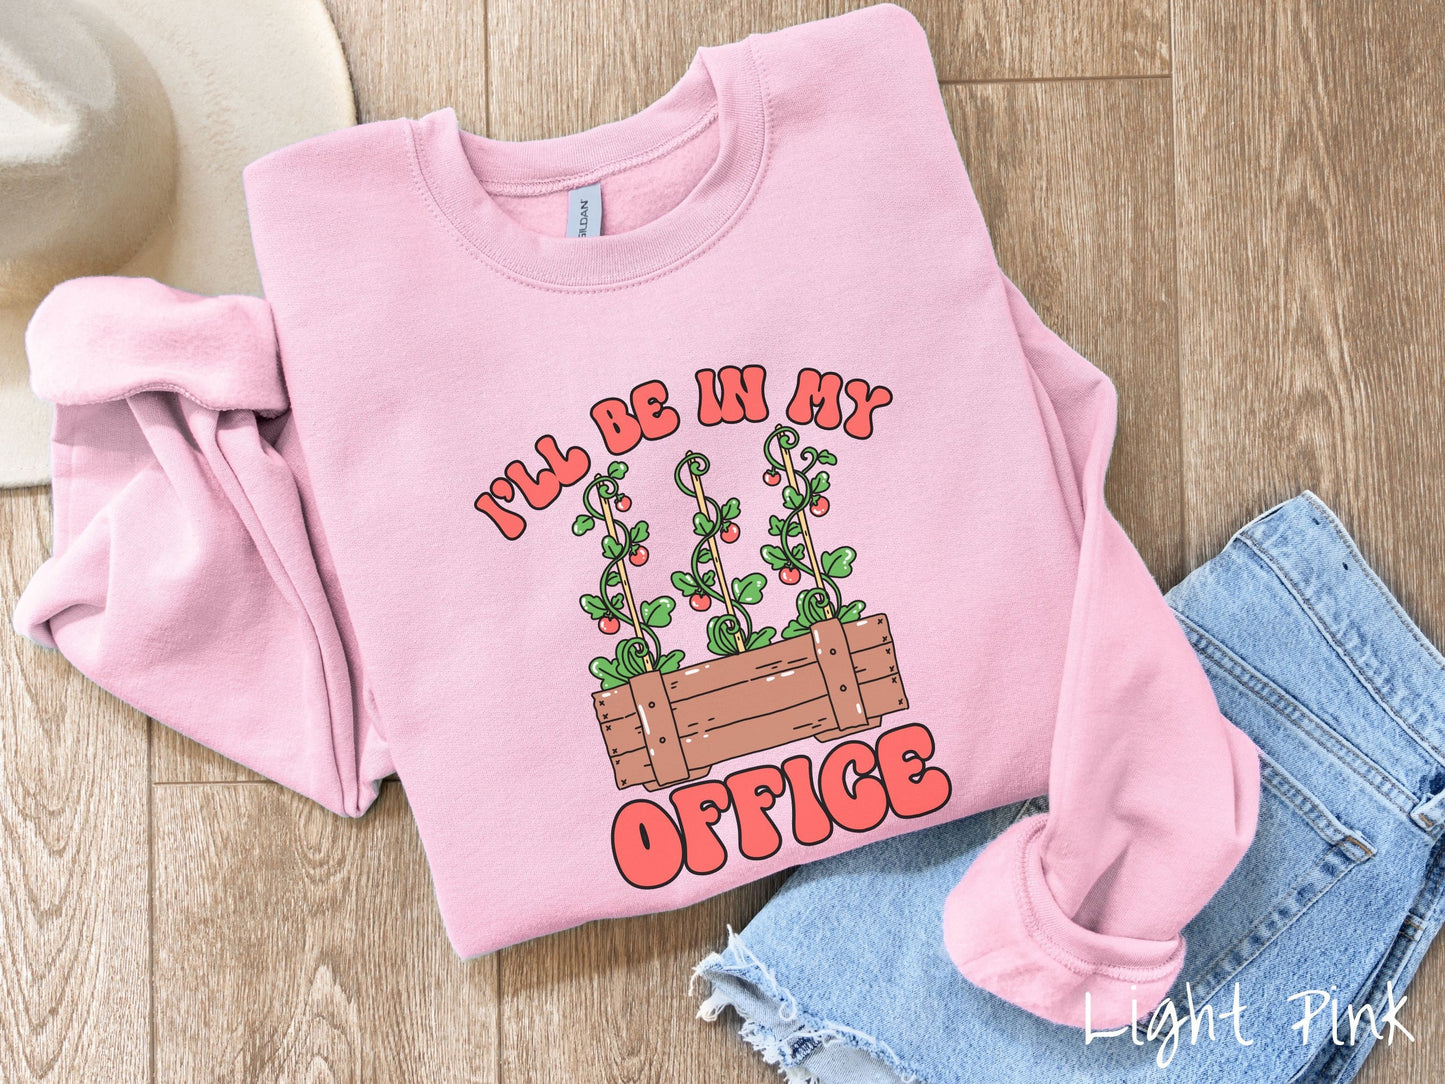 A cute, vintage light pink colored comfy sweatshirt with the text I’ll Be in My Office in red font across the front. In between the text is a wooden plant holder with three tomato vines sprouting tomatoes climbing upwards.